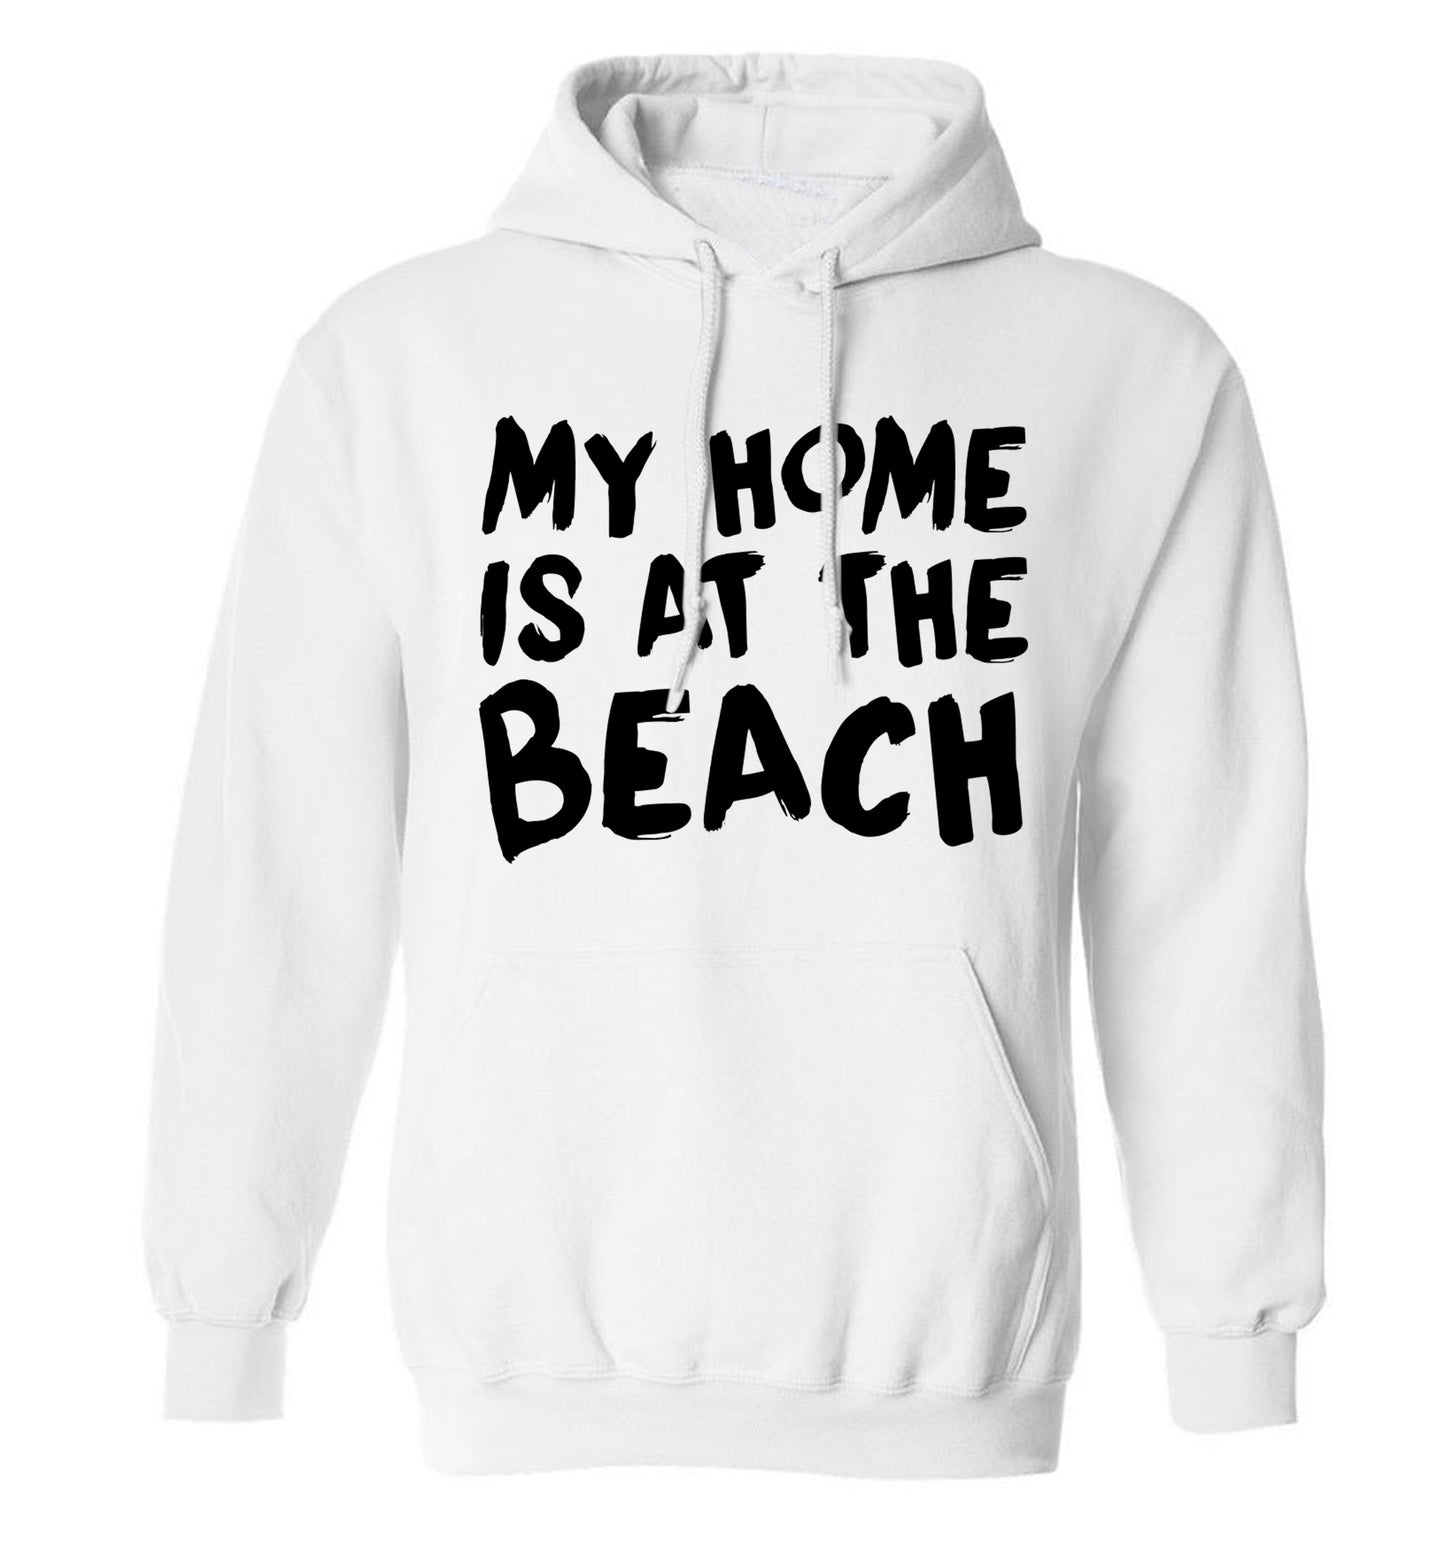 My home is at the beach adults unisex white hoodie 2XL